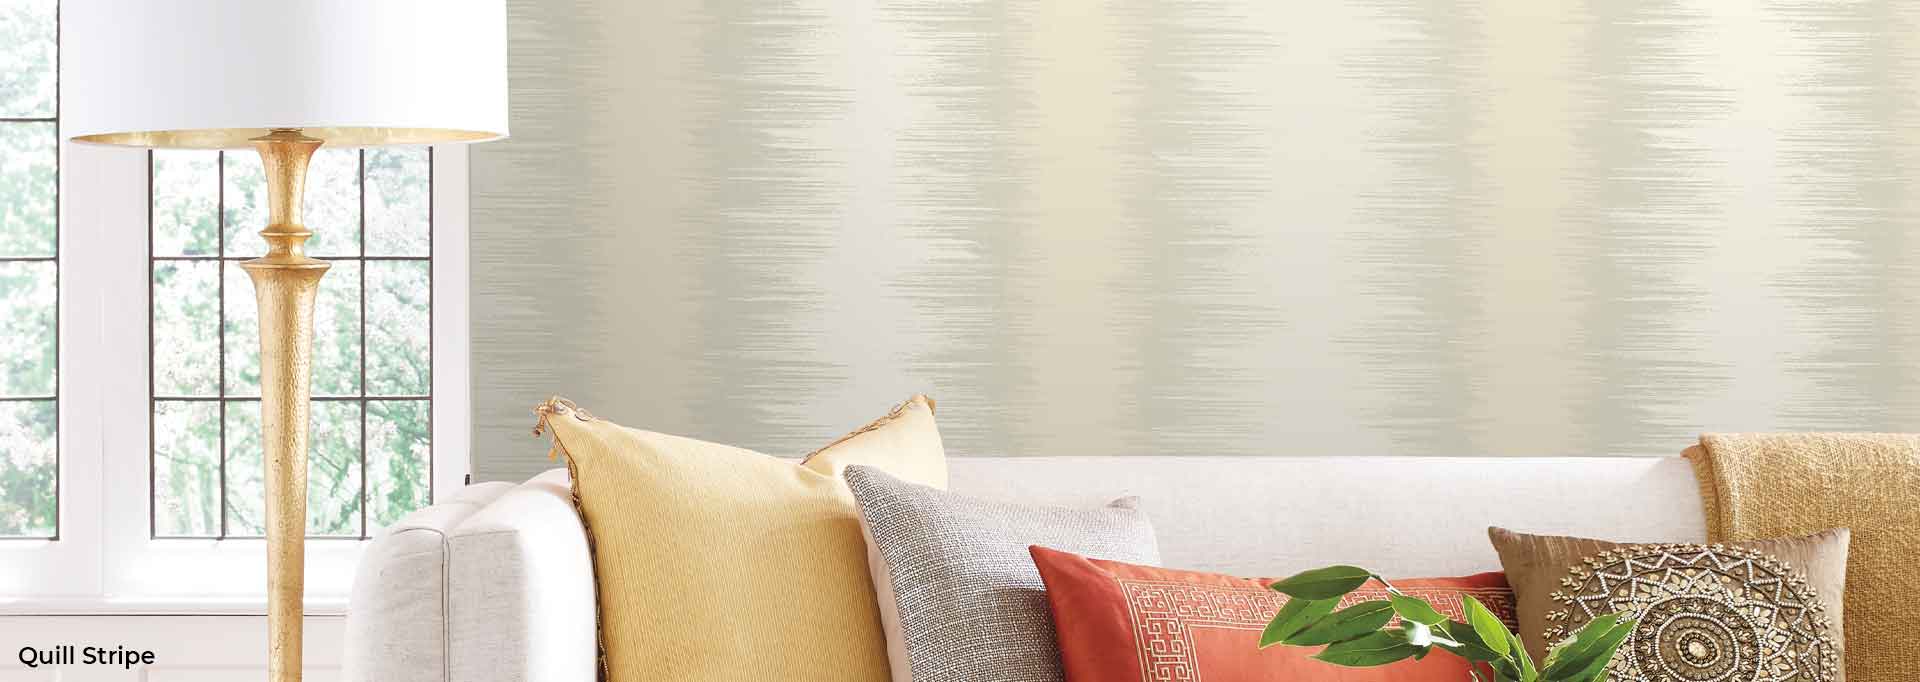 CONCORD WALLCOVERINGS Decorator, Grasscloth Texture Wallpaper